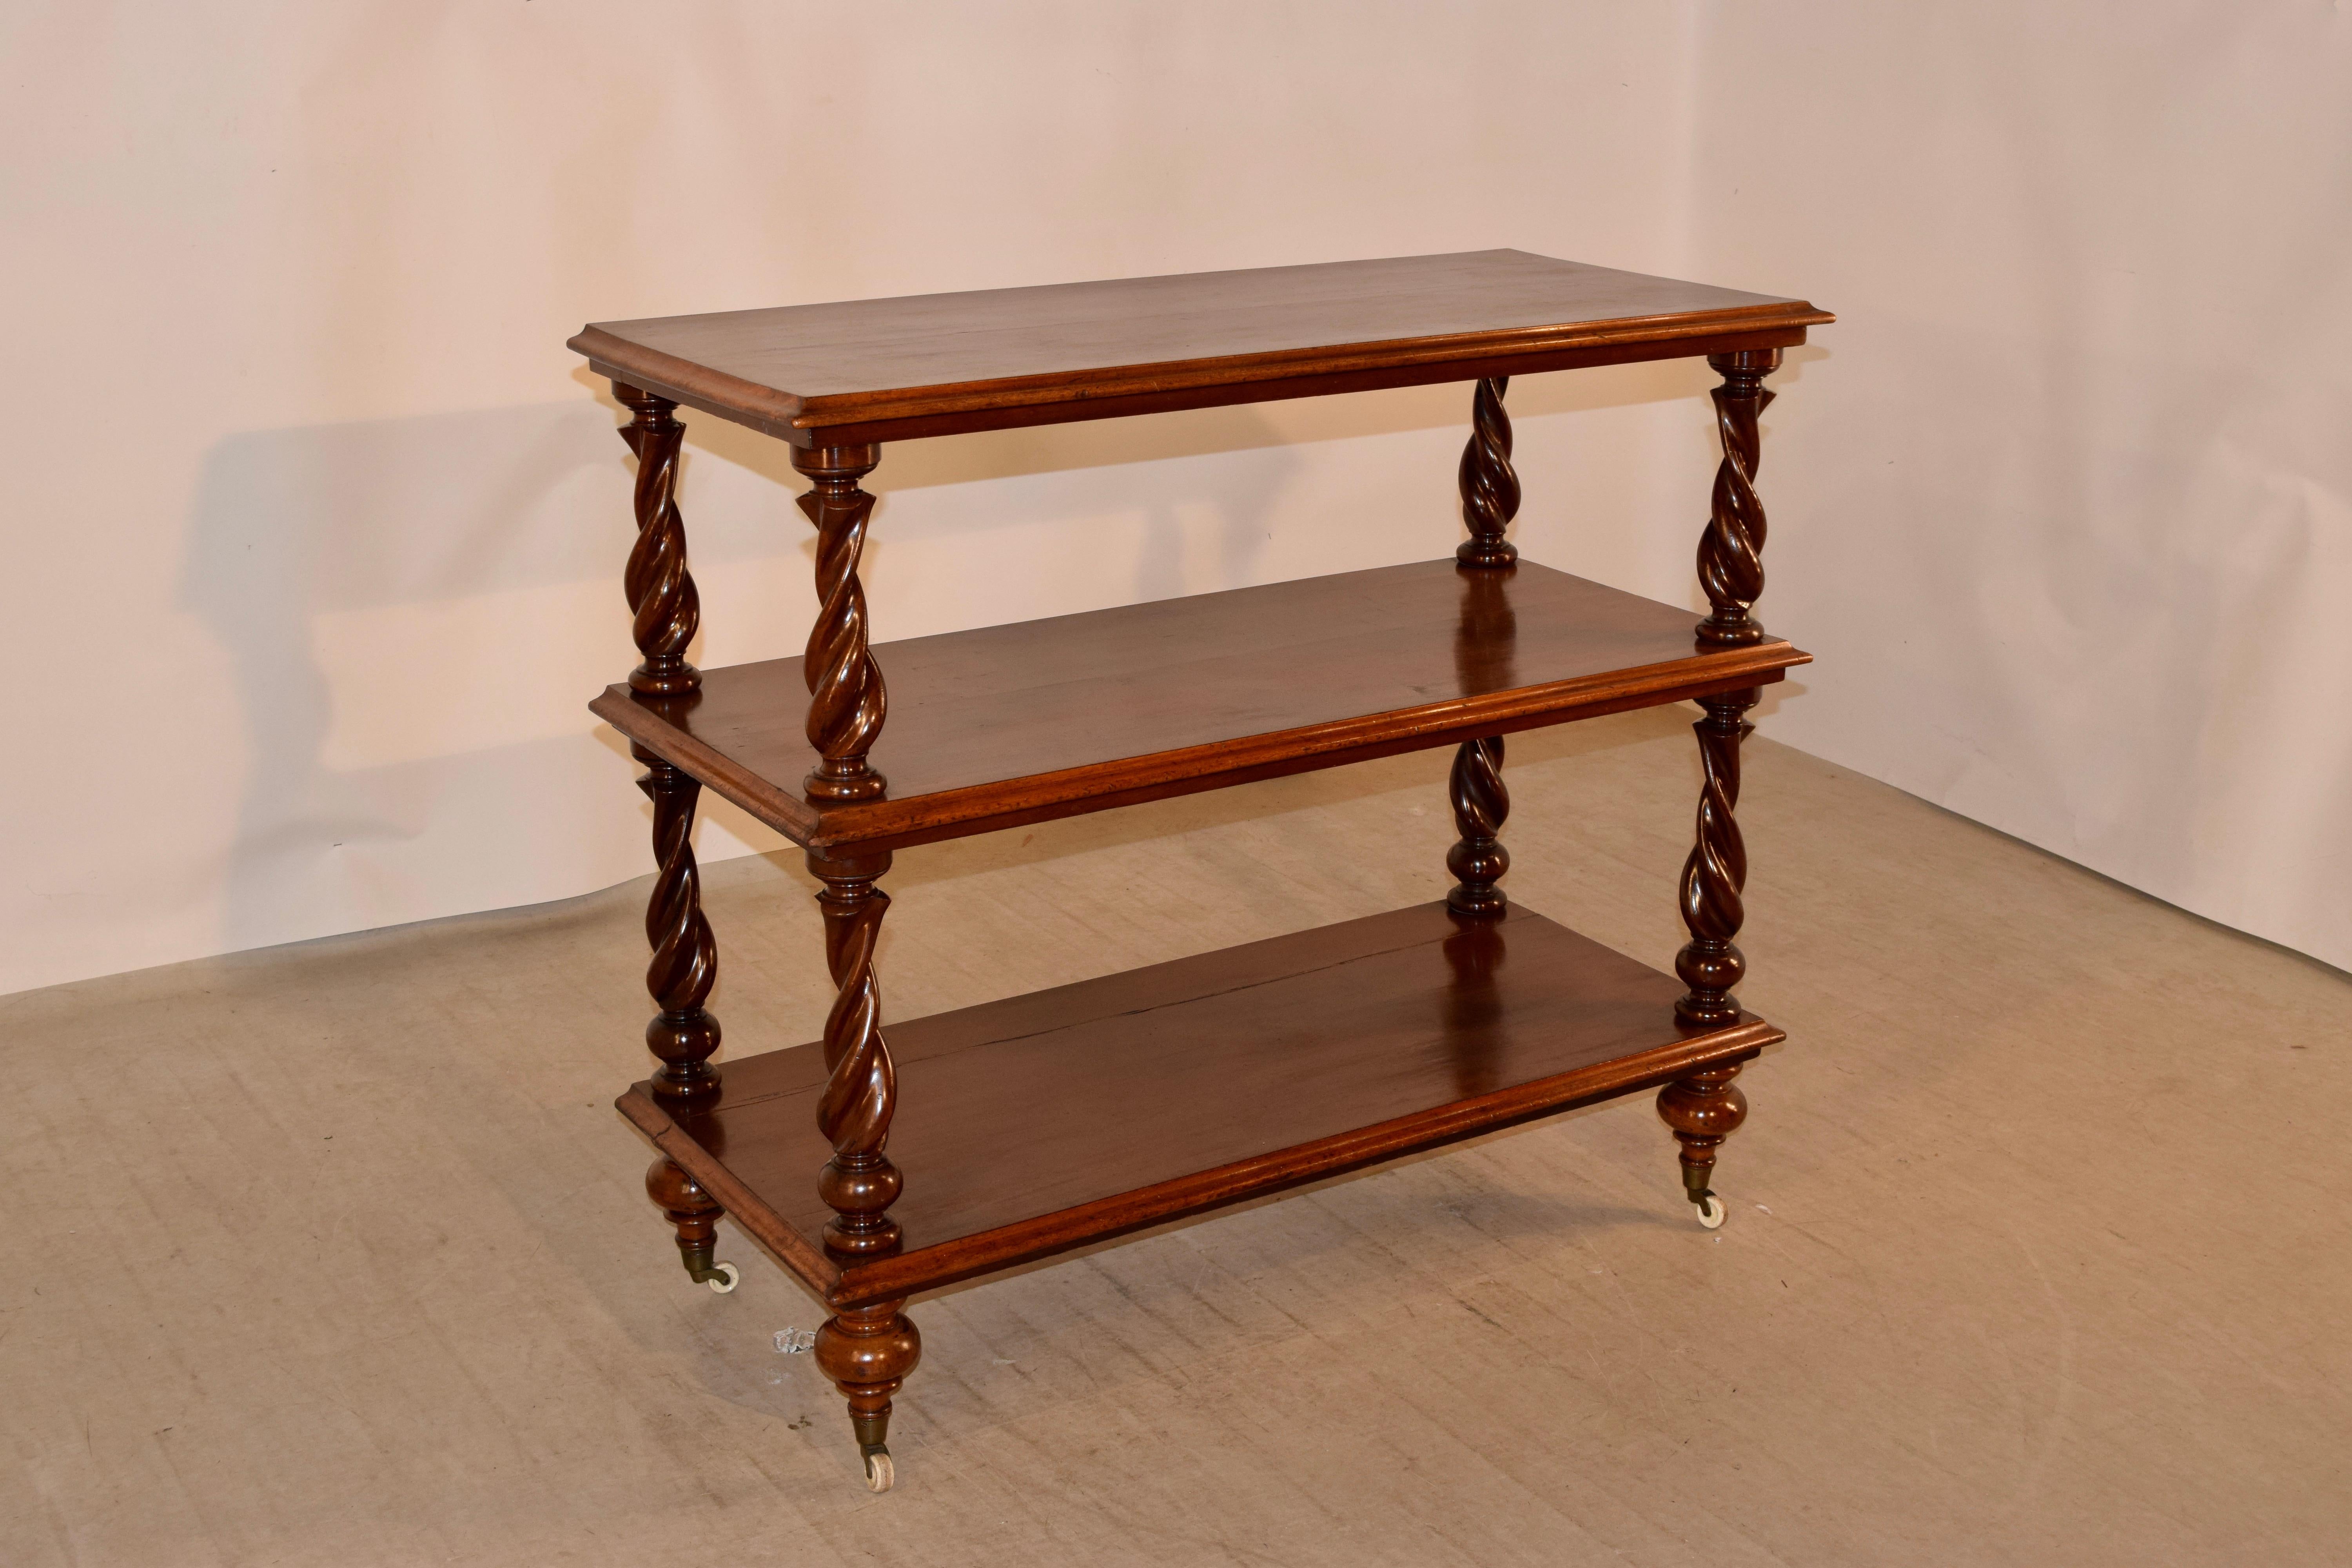 19th century mahogany buffet from England with three shelves, all with beveled edges and separated by hand-turned graduated barley twist shelf supports. The piece is supported on hand-turned feet with what appear to be the original porcelain castors.